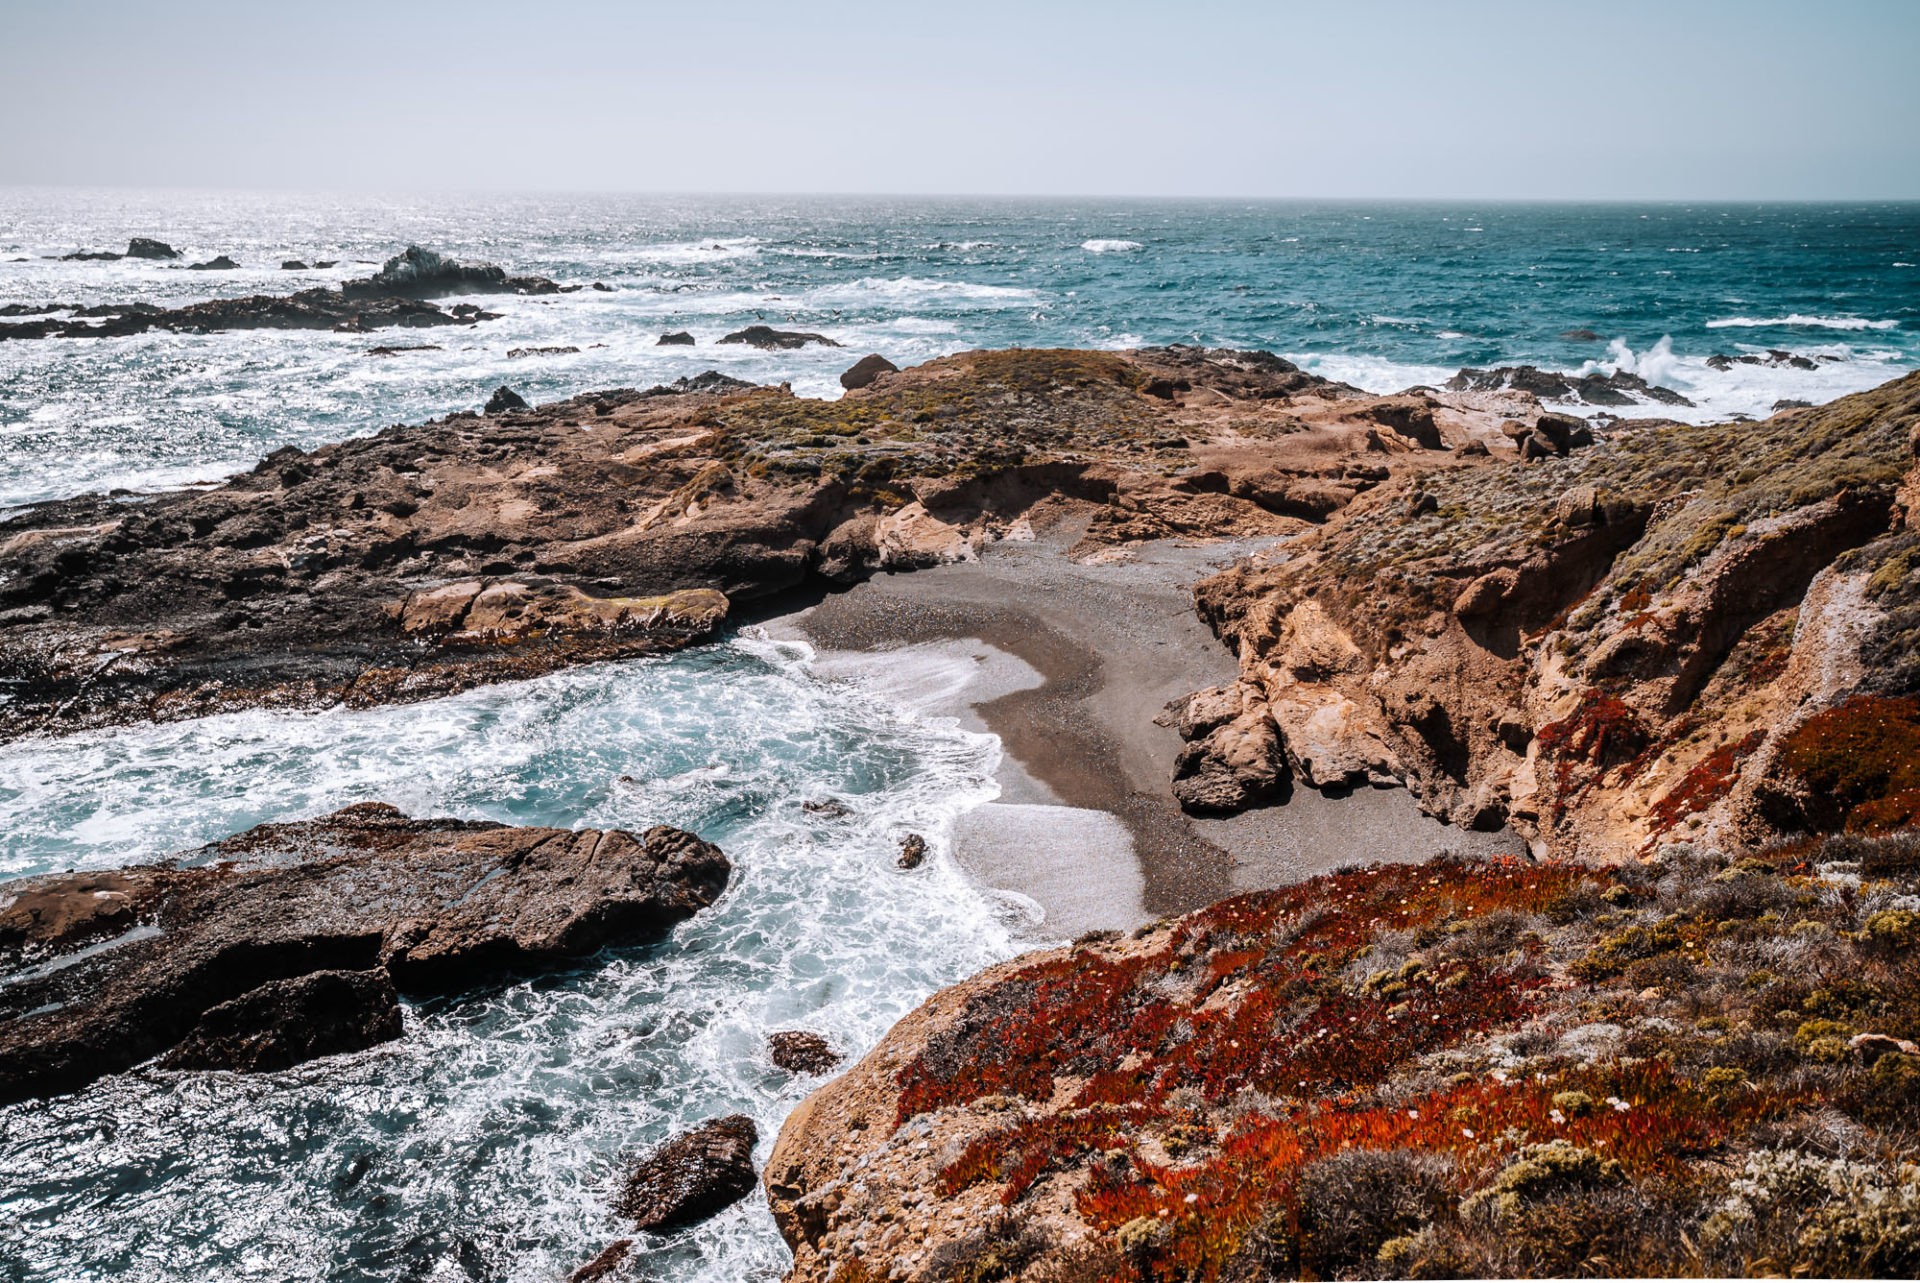 things to do in Monterey